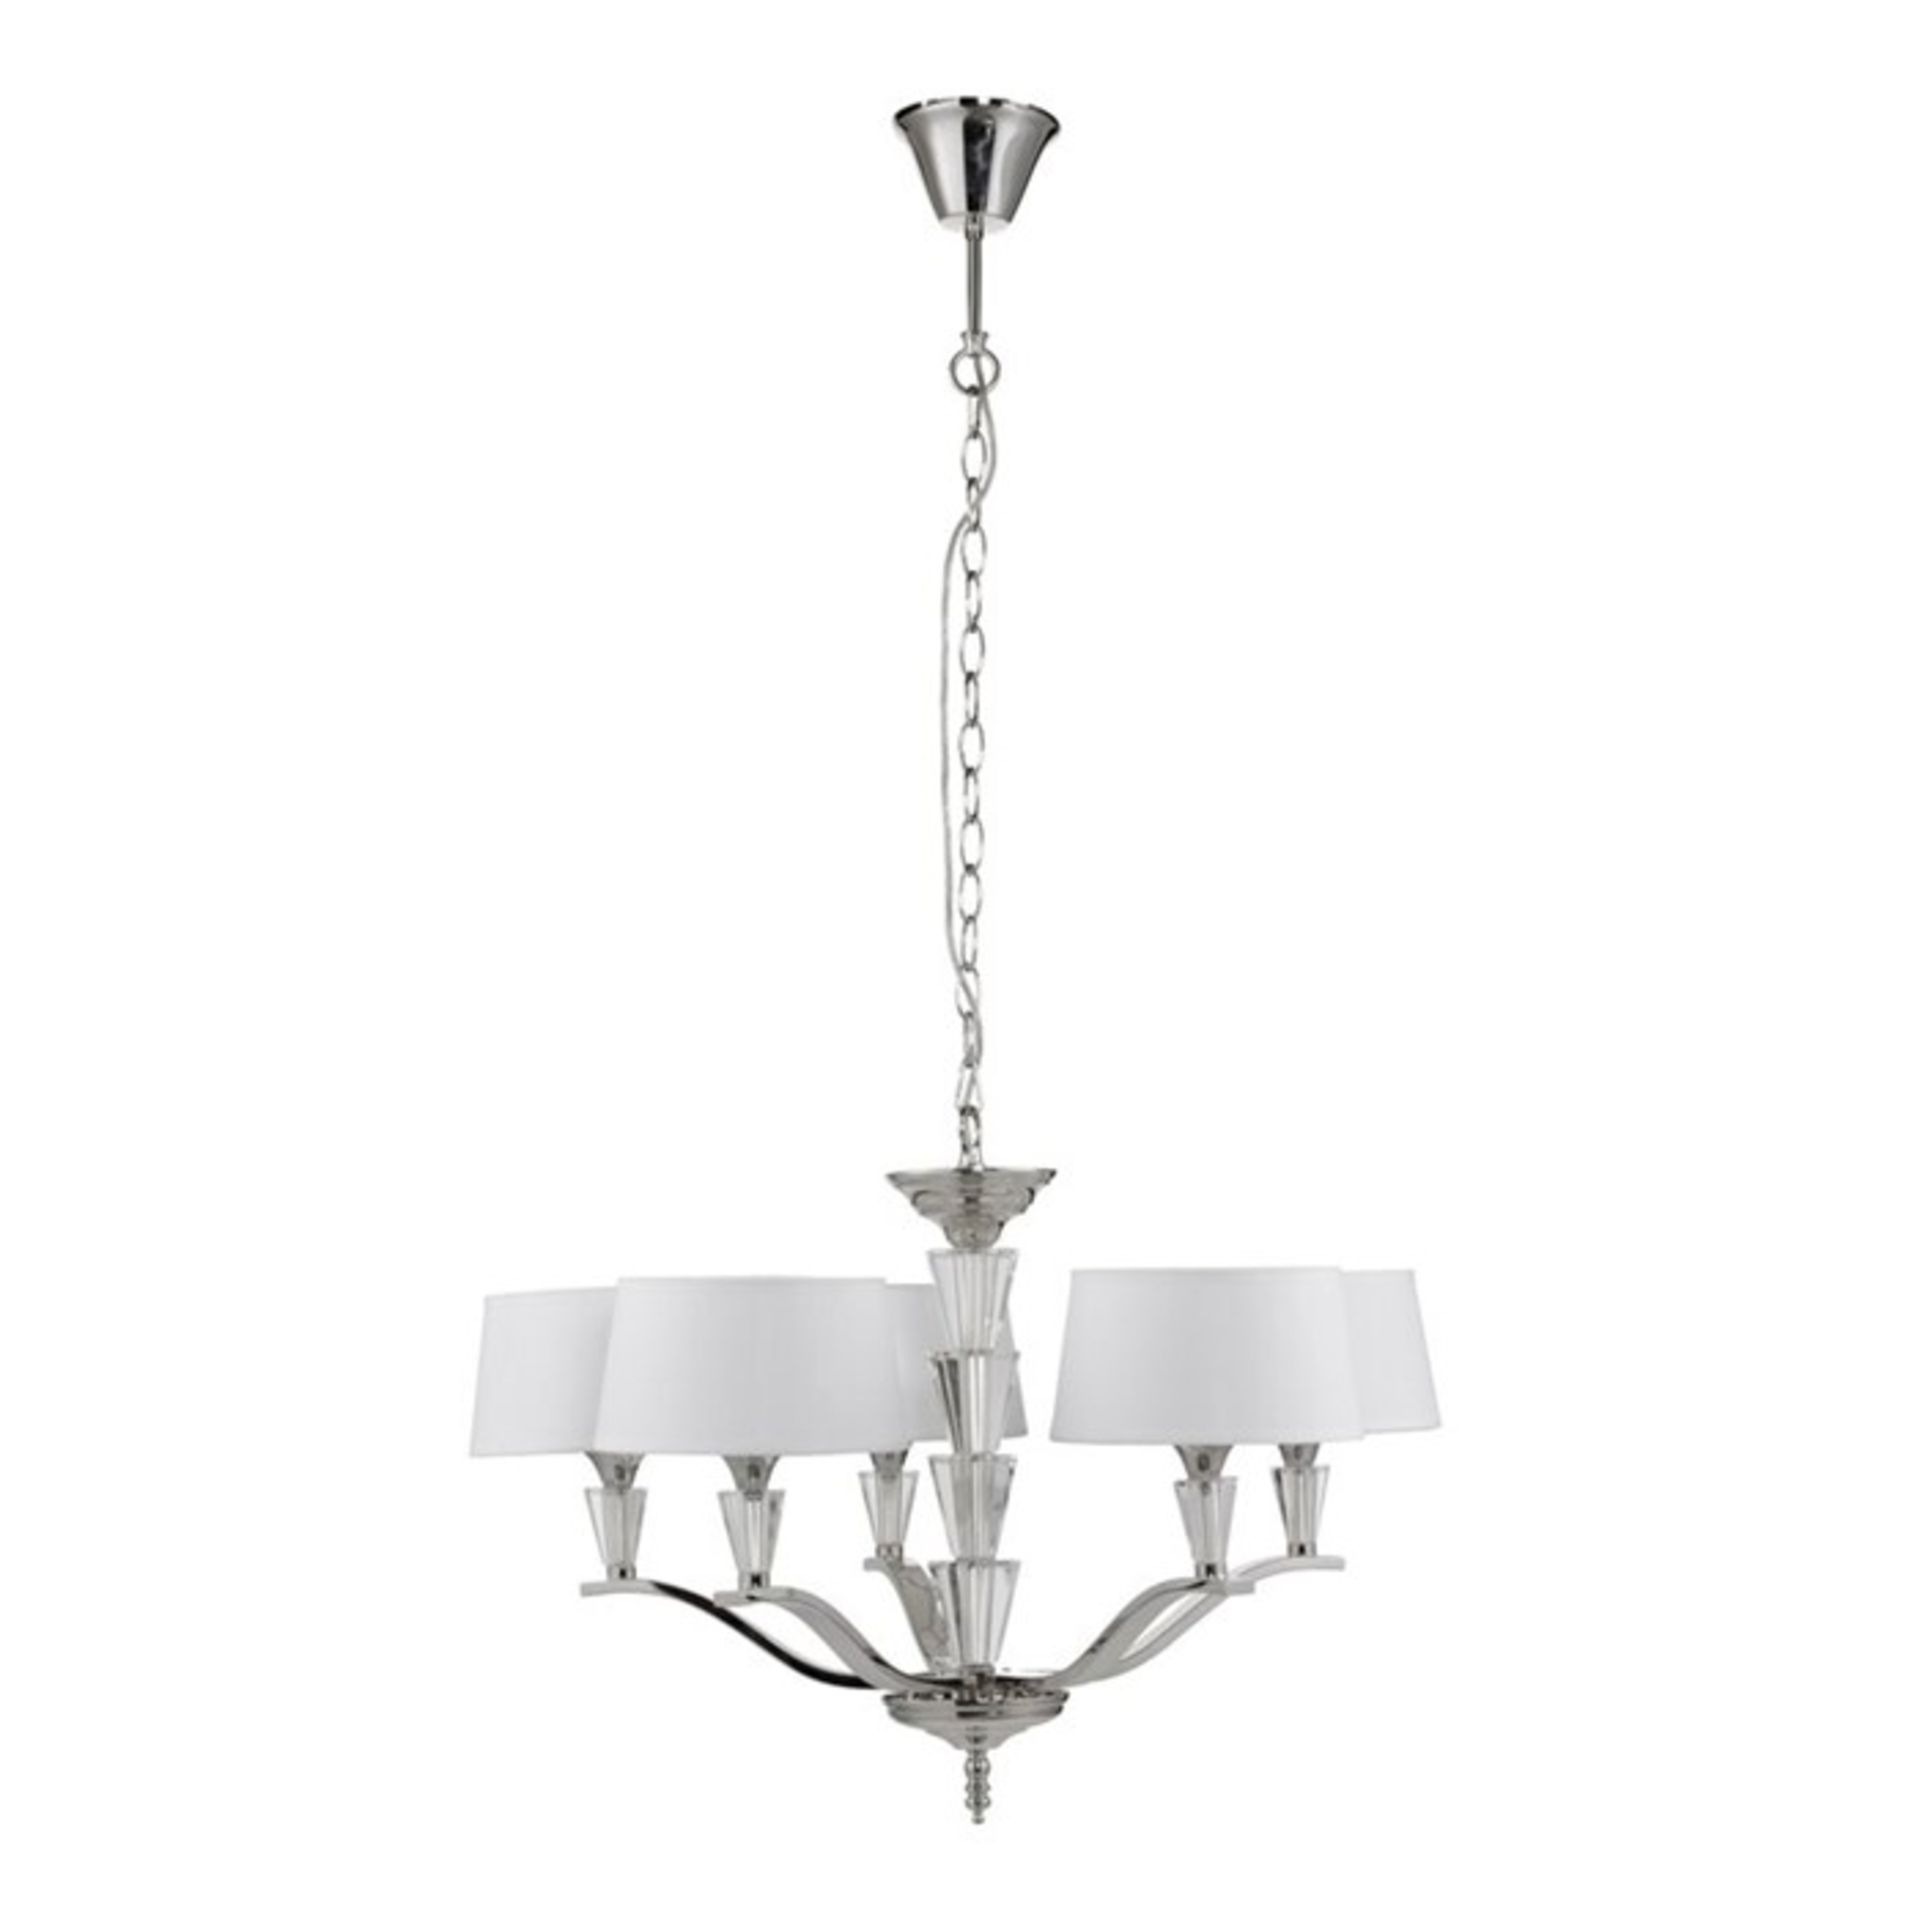 Ophelia & Co., Galilee 5-Light Shaded Chandelier (WHITE AND CHROME) - RRP £219.29 (UEL3431 - 15931/